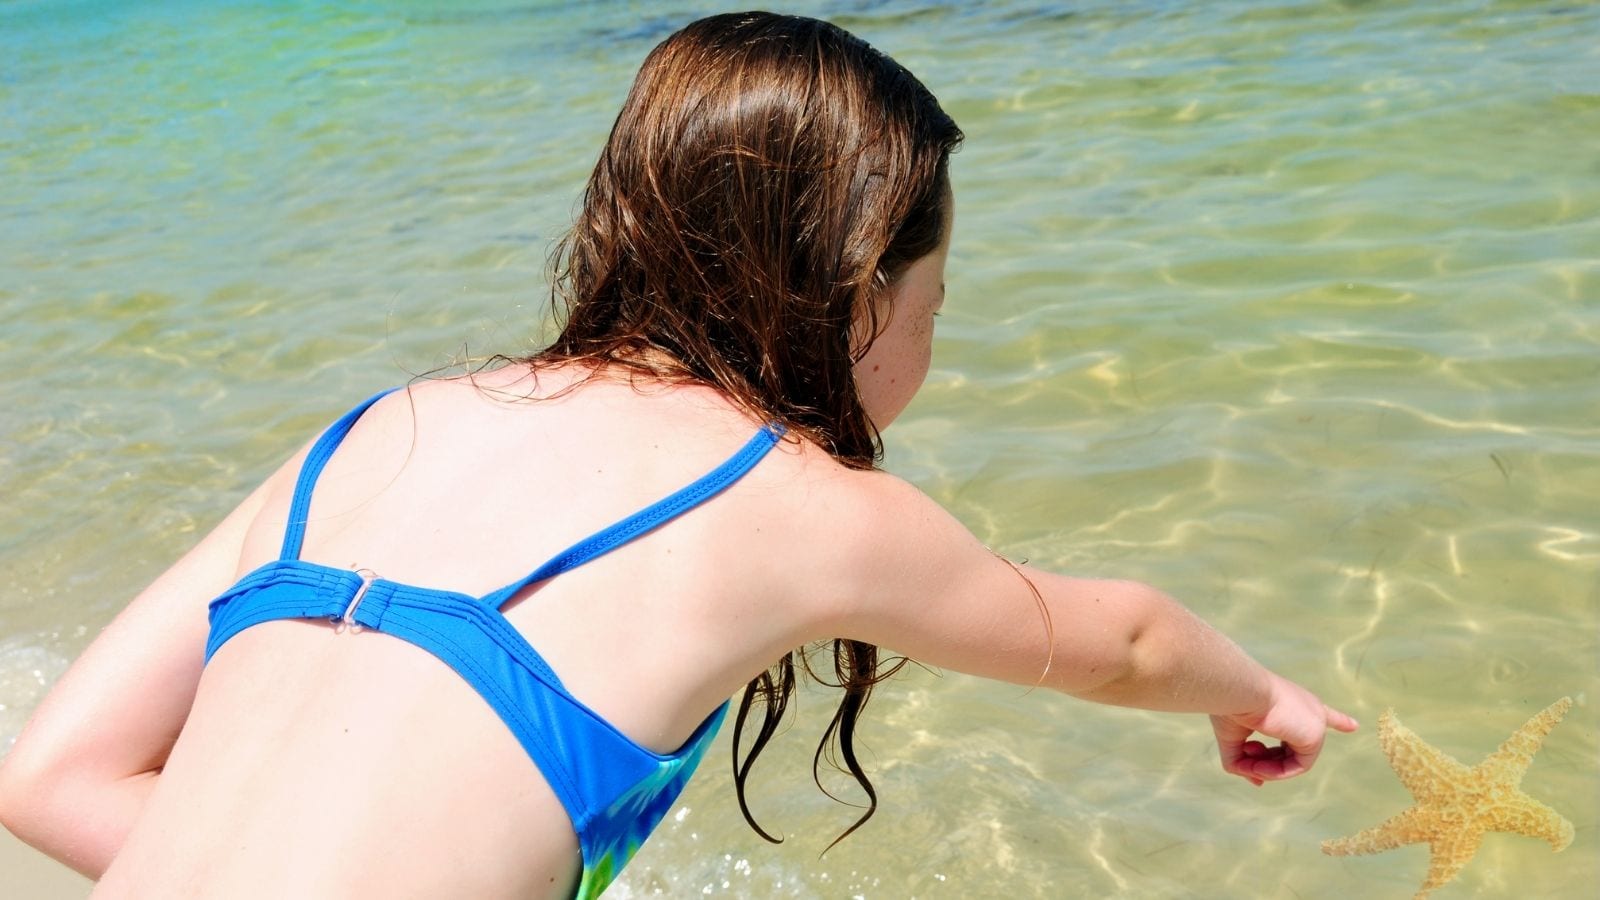 Young girl excited to find starfish in shallow ocean (Photo: Cheryl Casey / Shutterstock)